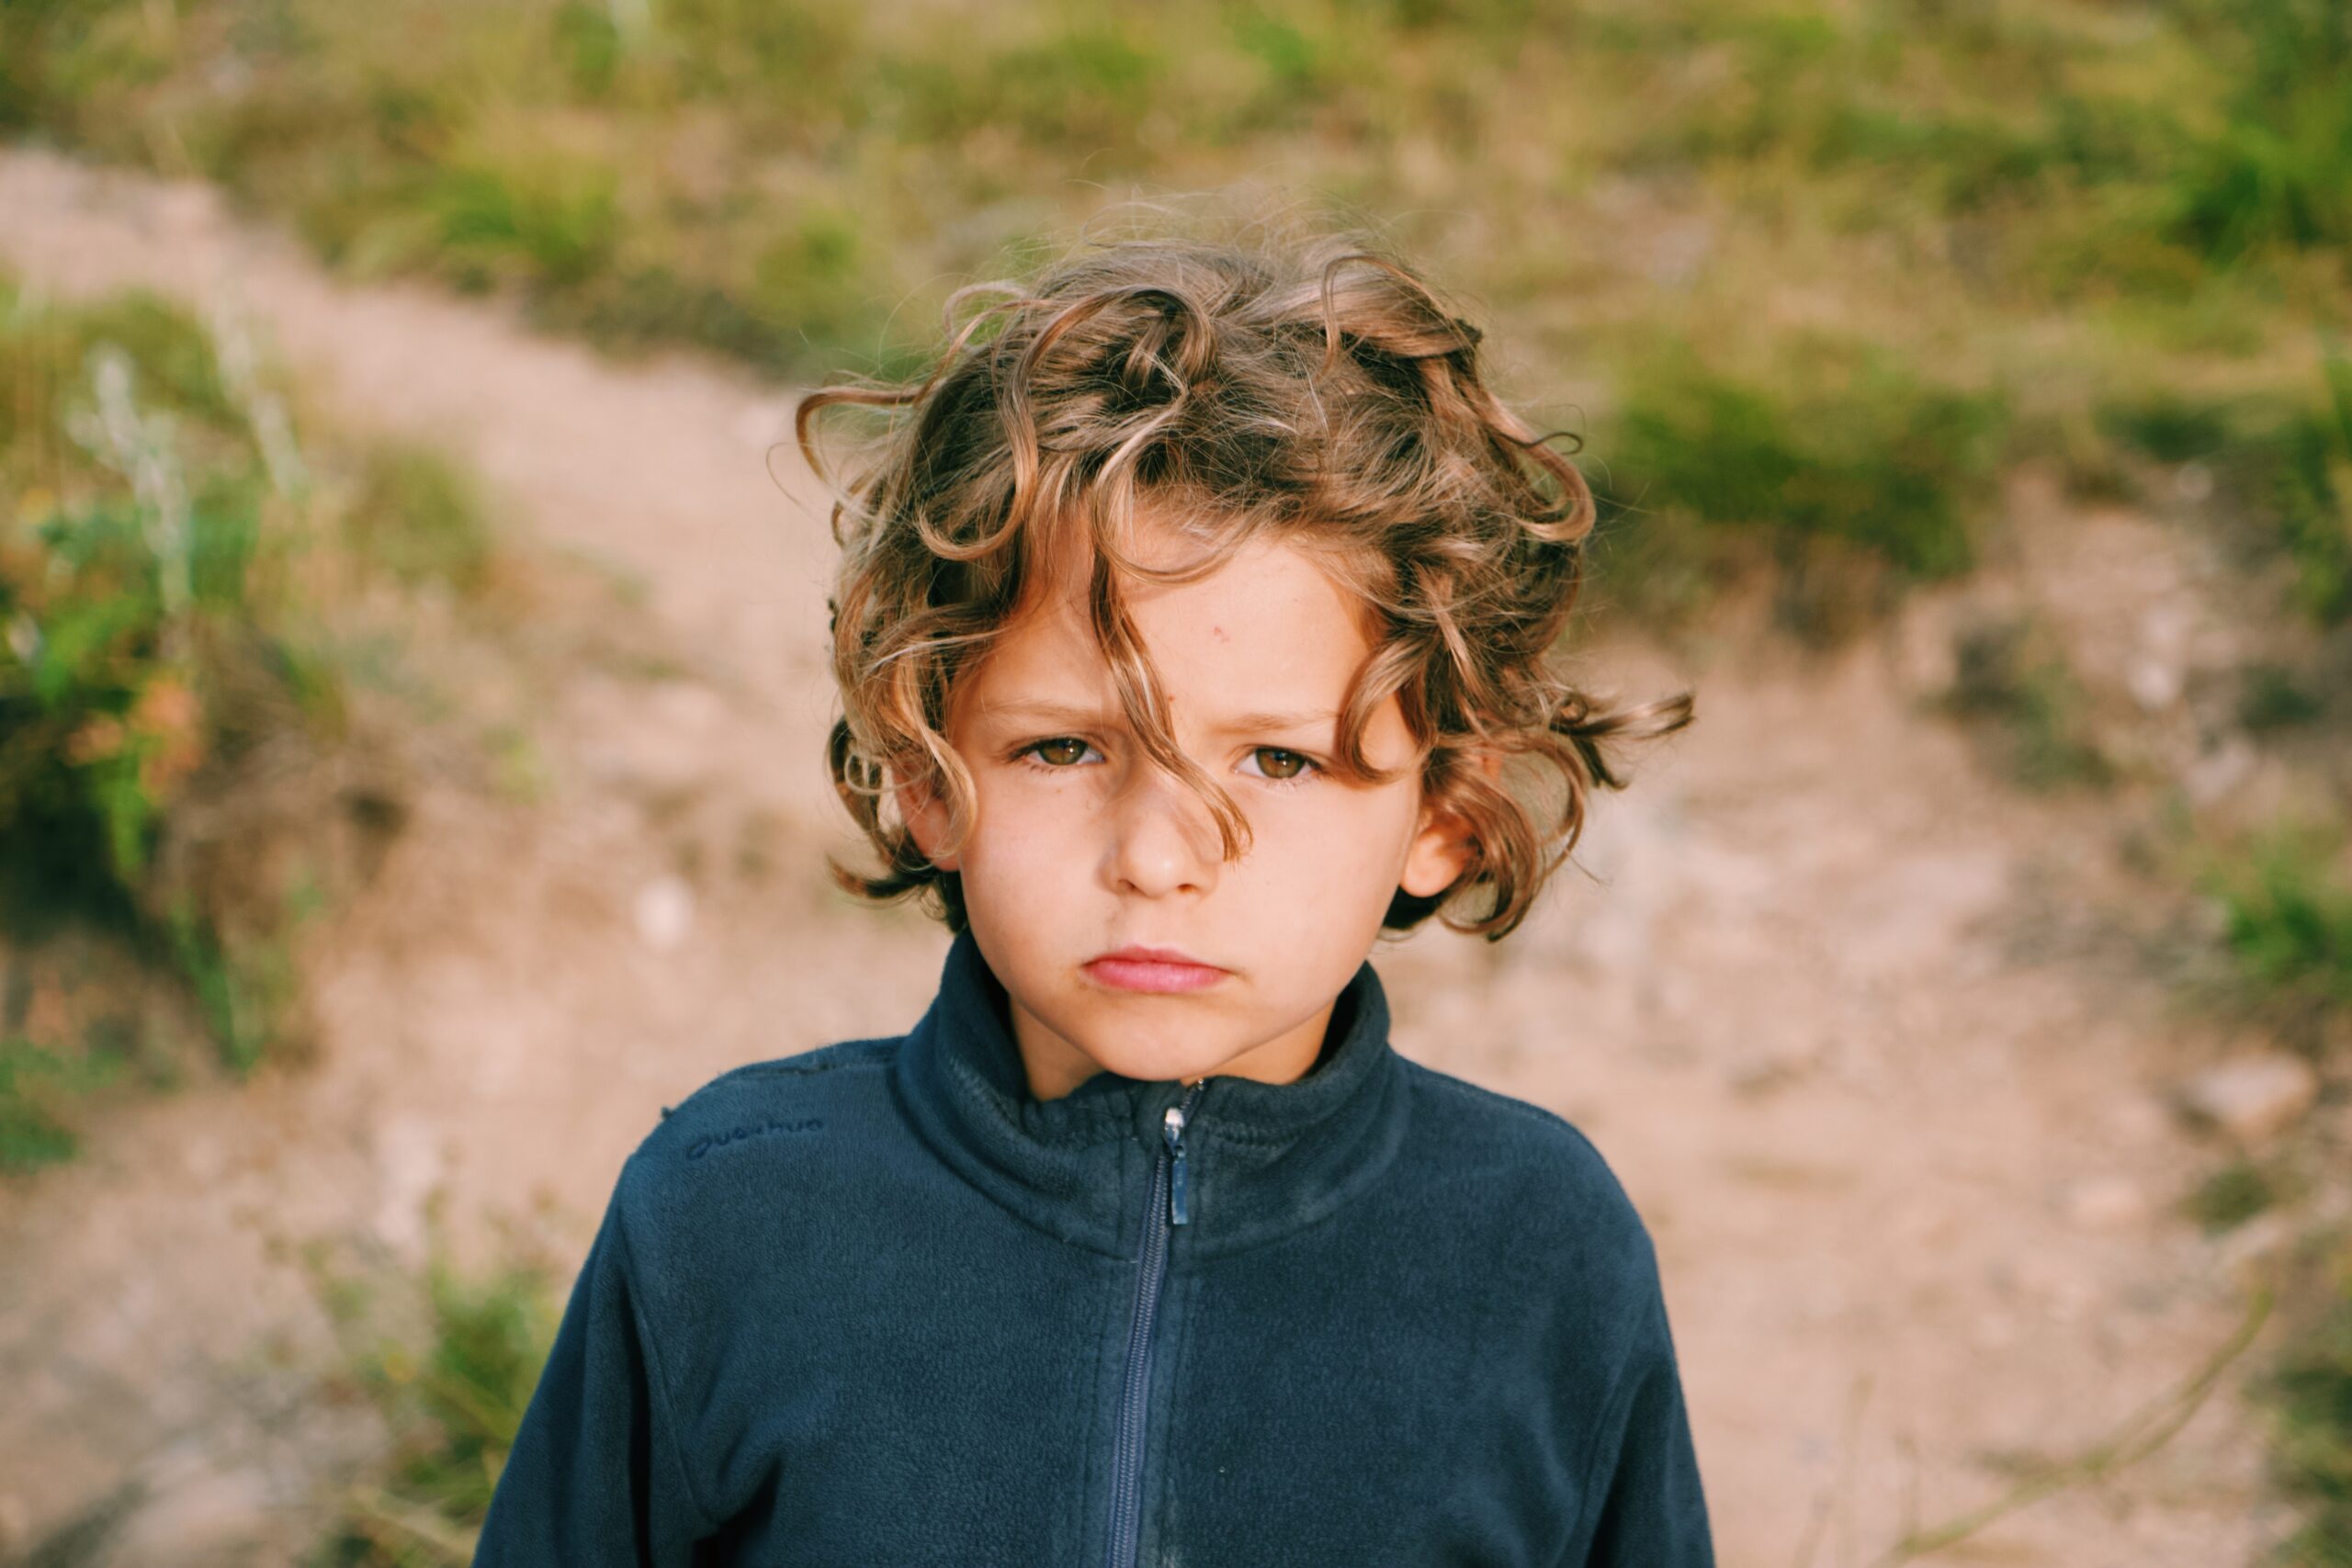 Boy looking at camera in training ground for self-regulation